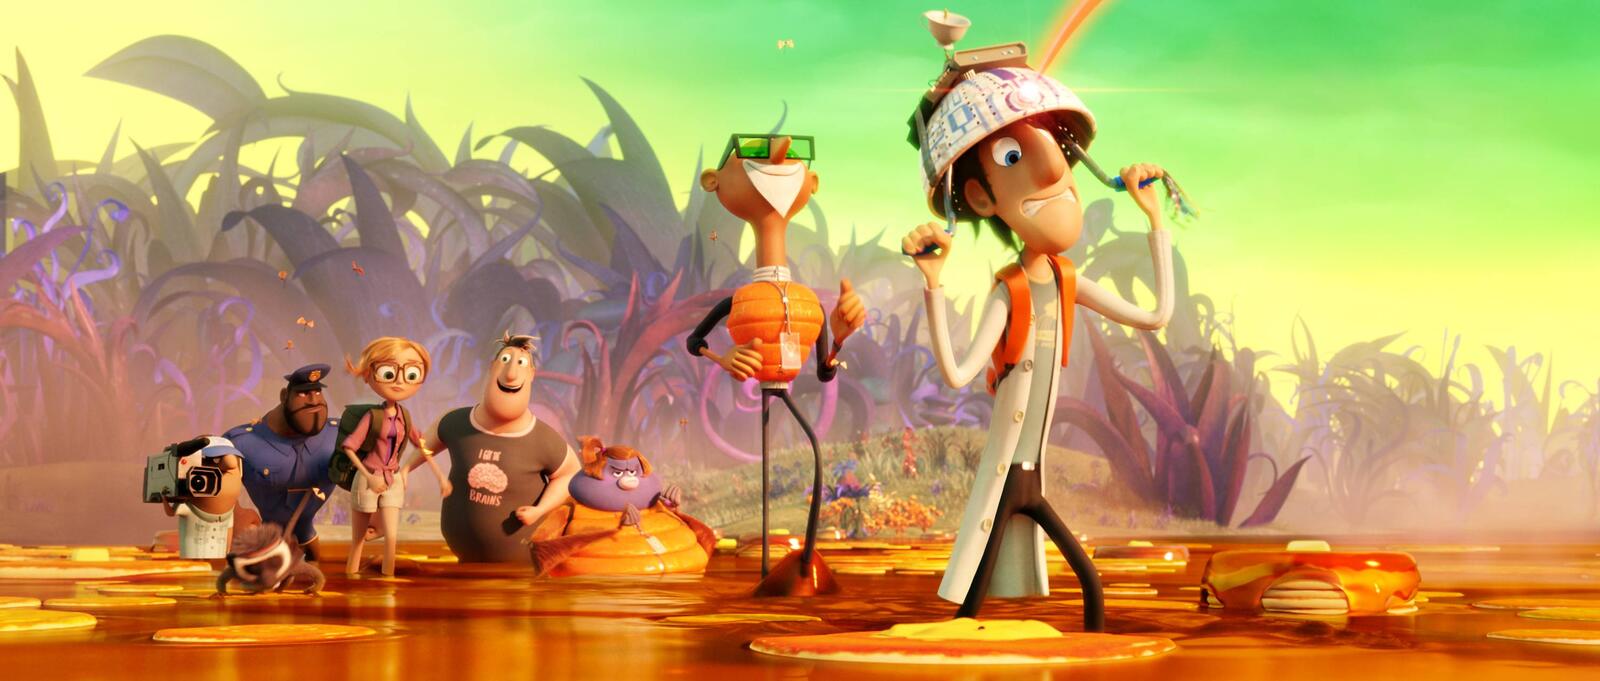 Wallpapers comedy fantasy Cloudy with a Chance of Meatballs 2 on the desktop